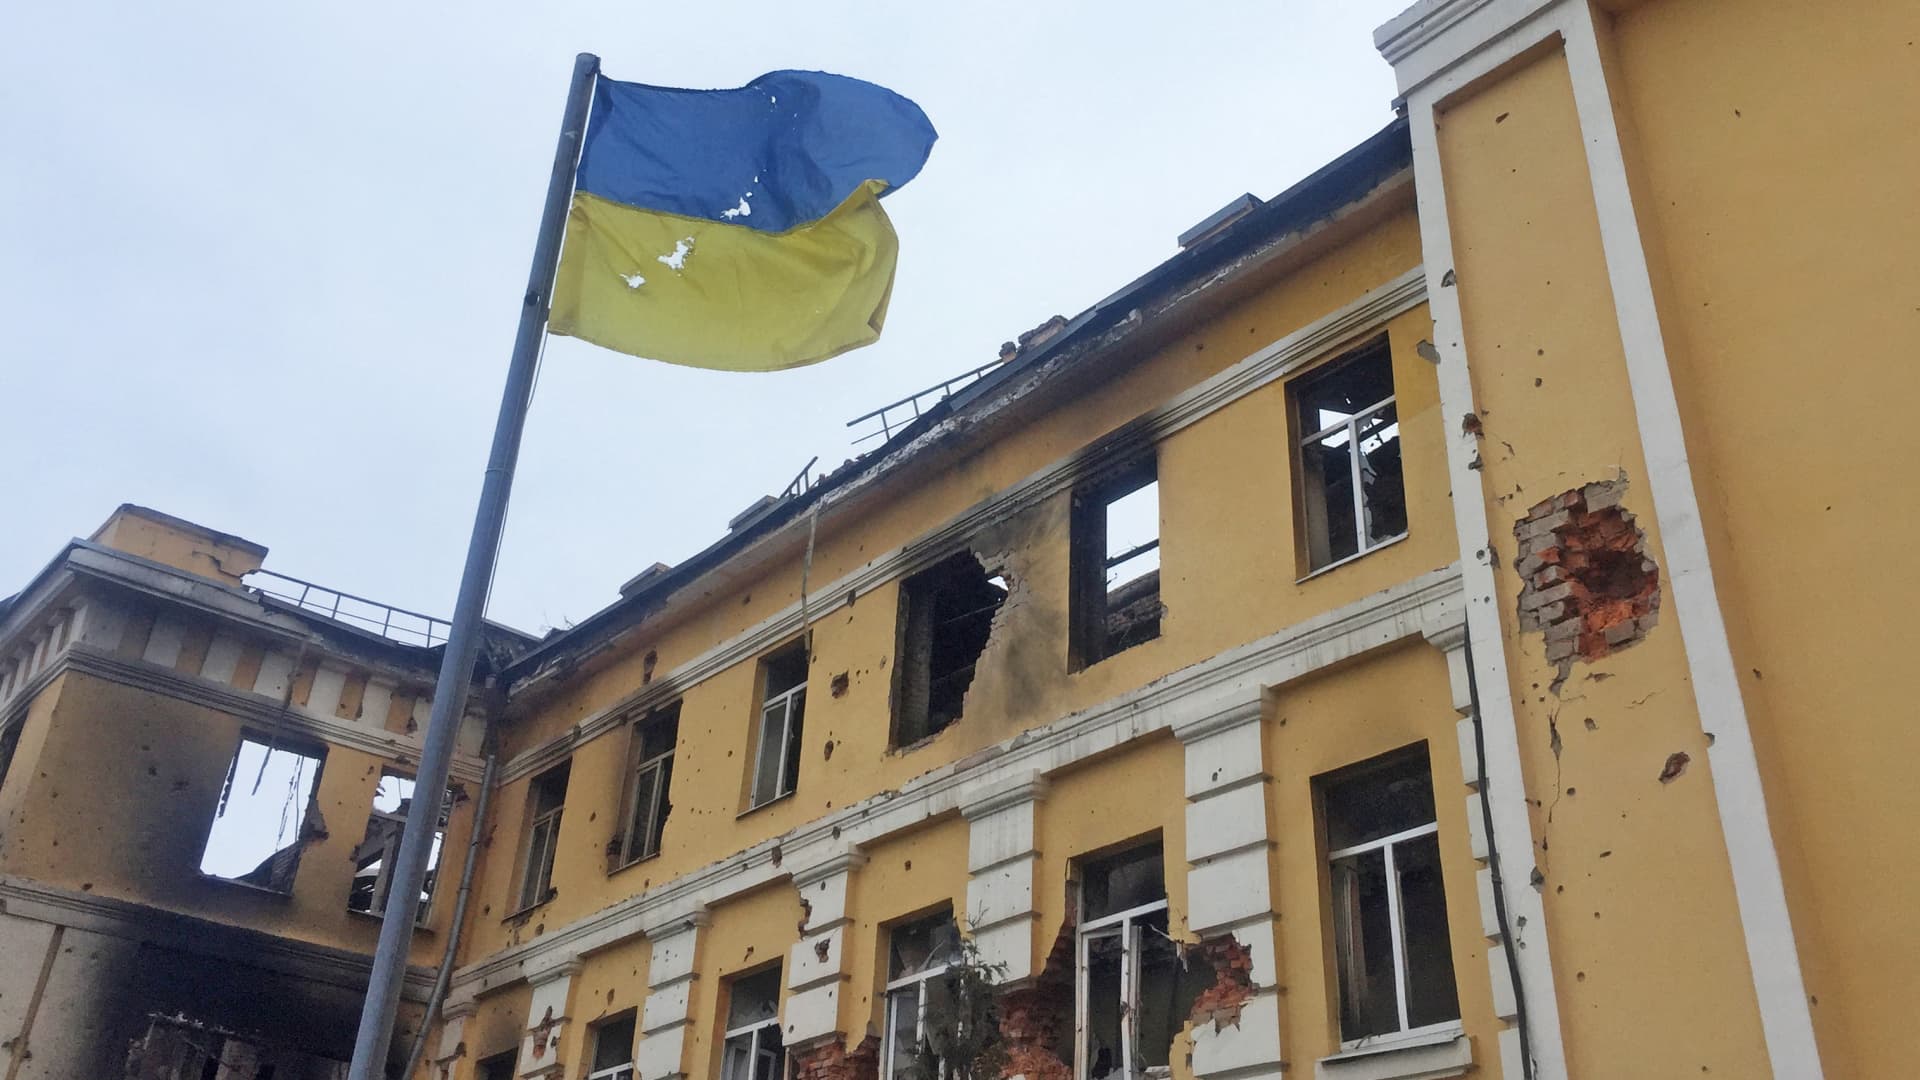 The Ukrainian national flag is seen in front of a school which, according to local residents, was on fire after shelling, as Russia's invasion of Ukraine continues, in Kharkiv, Ukraine February 28, 2022.